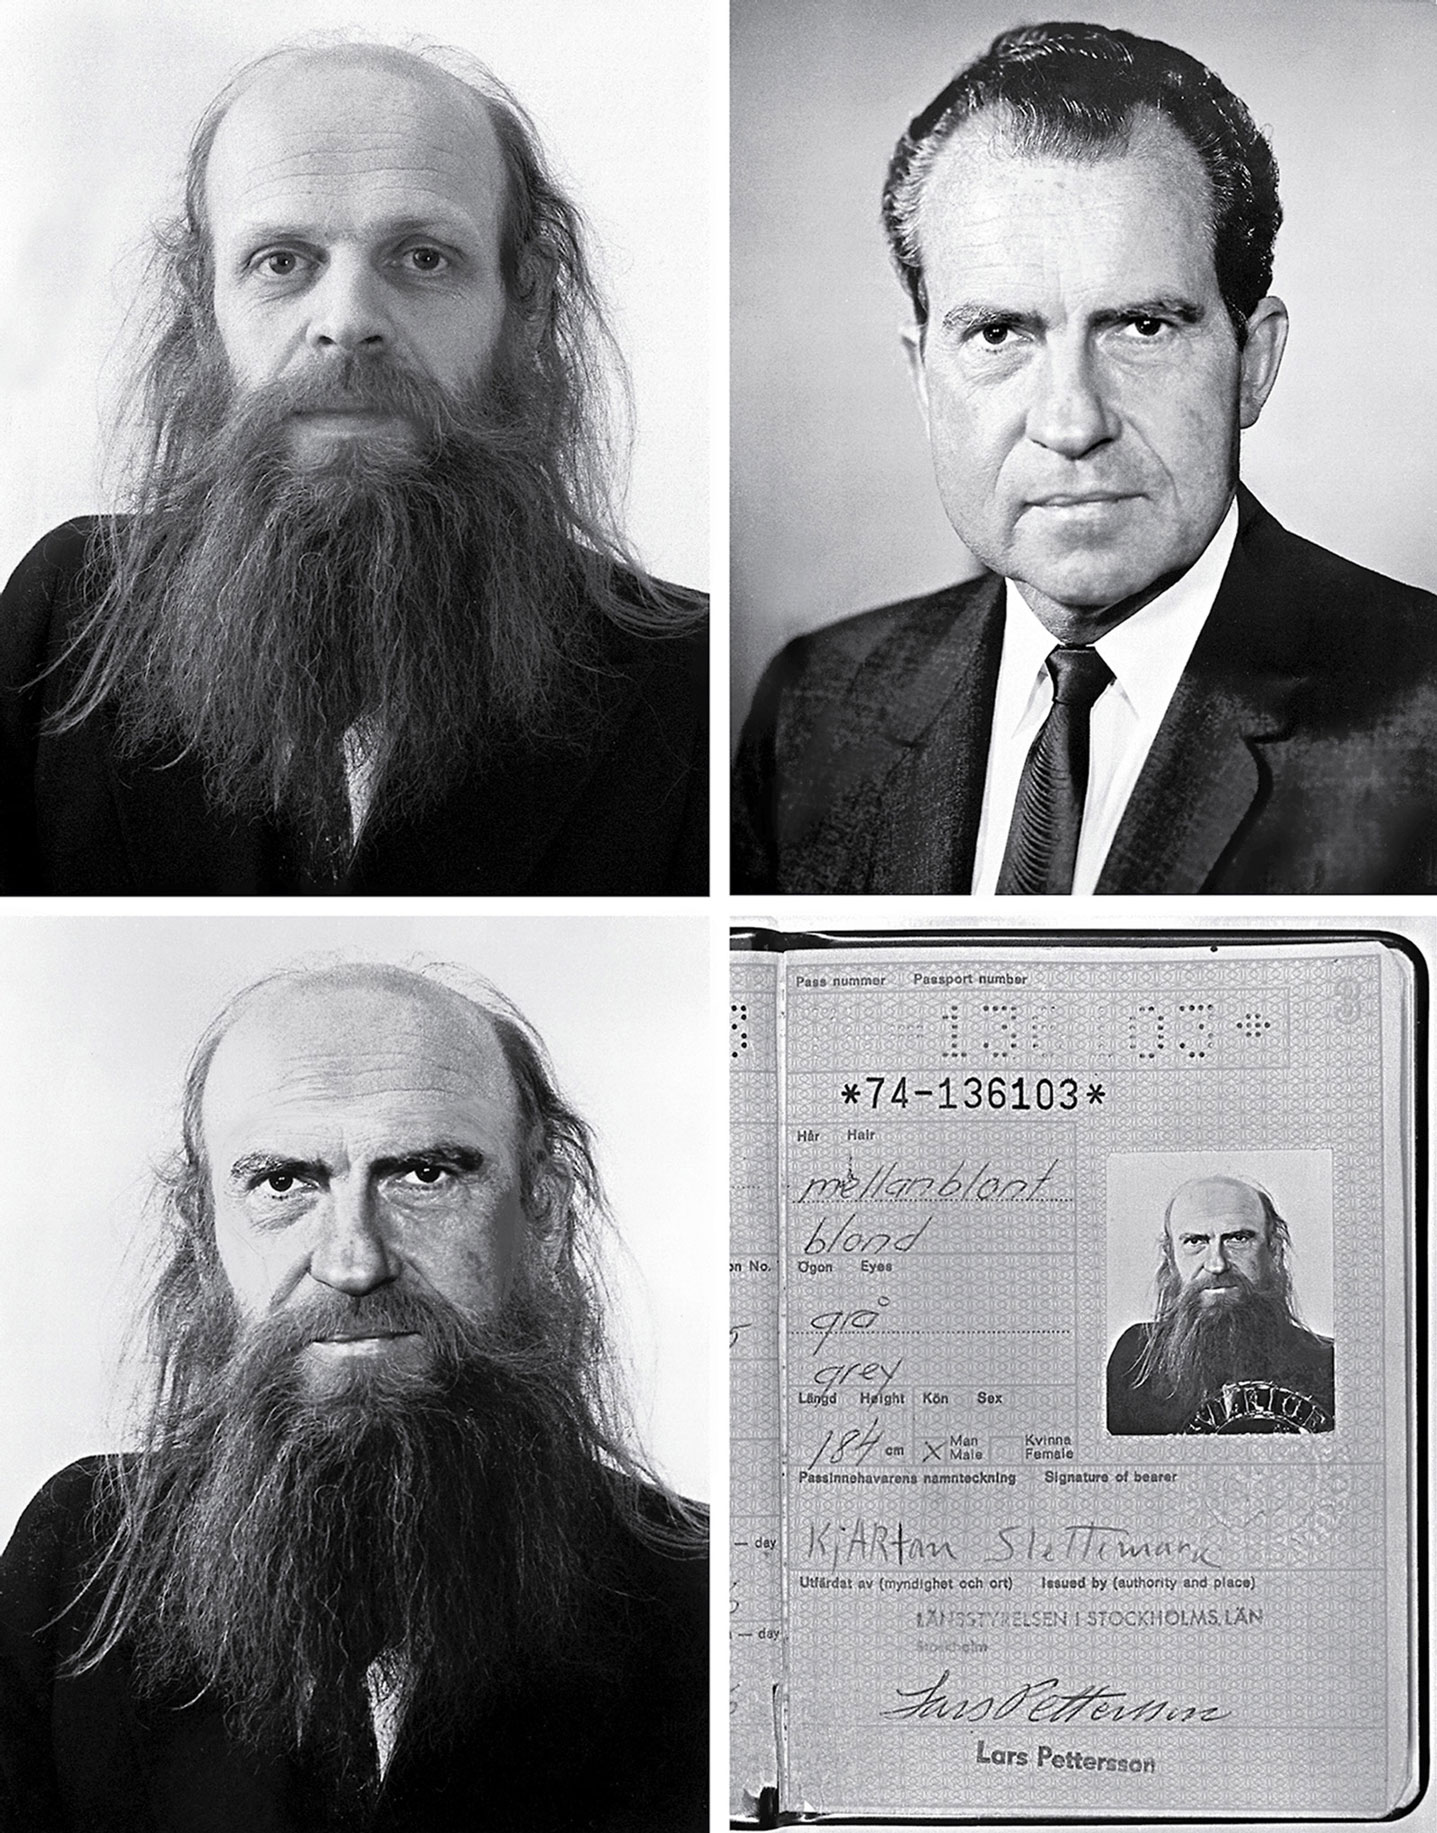 There are four photos. The first is of Swedish-Norwegian artist Kjartan Slettemark, the second is of Richard Nixon, and the third is of Nixon’s face superimposed onto Slettemark’s head. The fourth is the image of Nixon’s face superimposed onto Slettemark’s head as it appears in the artist’s 1974 passport.